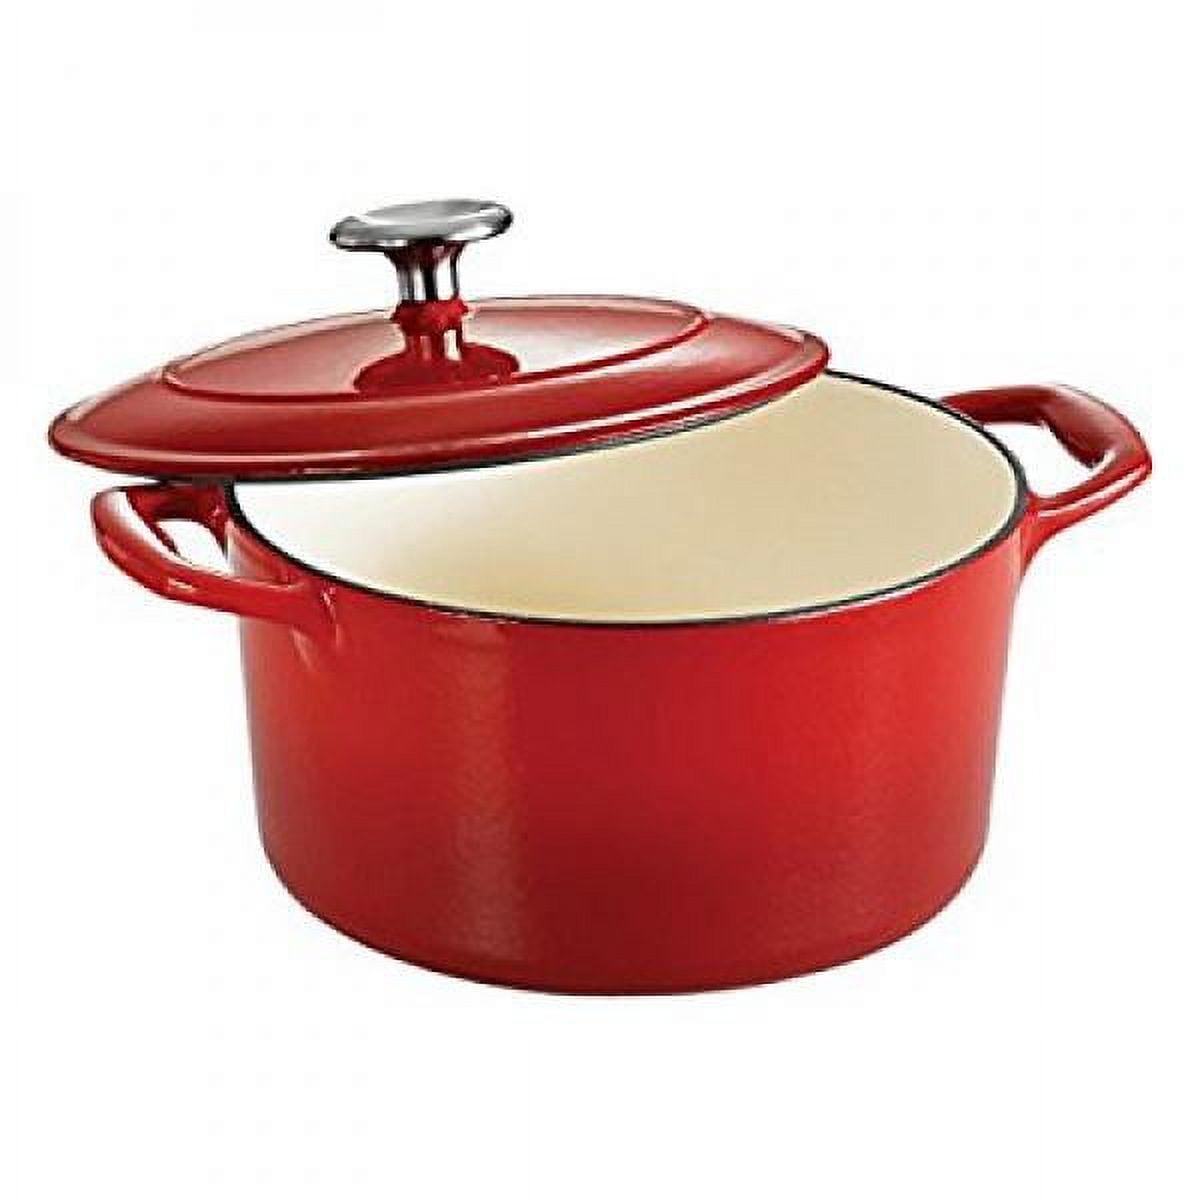 Tramontina Gourmet 3.5 qt. Round Enameled Cast Iron Dutch Oven in